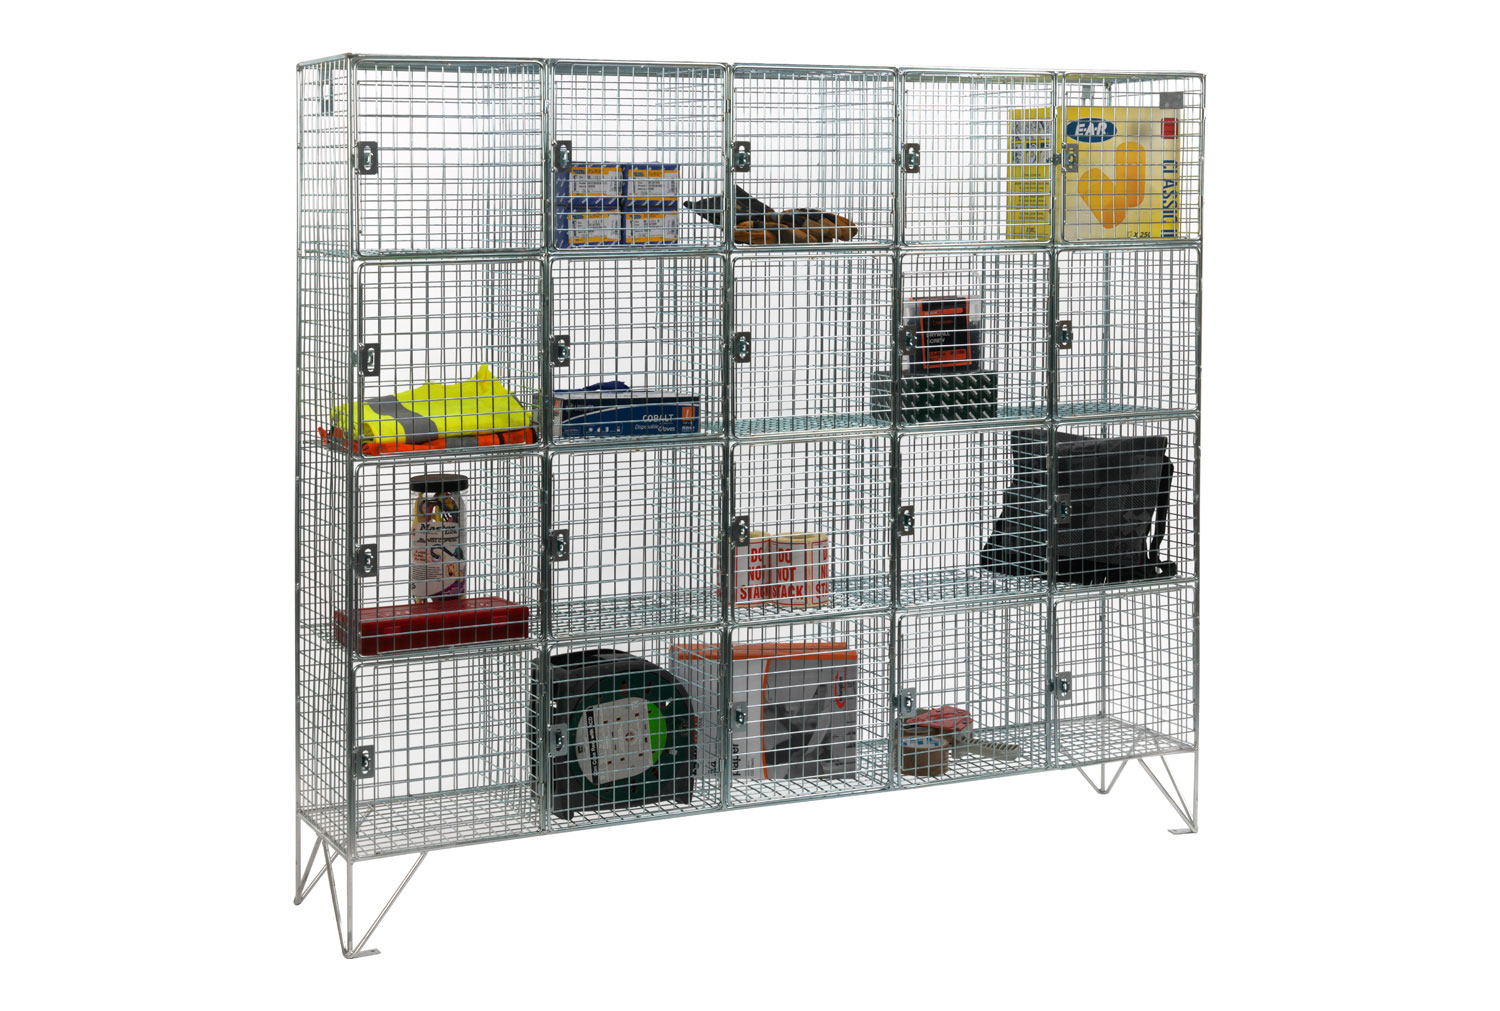 Express Delivery Premium 20 Multi Compartment Wire Mesh Lockers, 153wx46dx137h (cm)